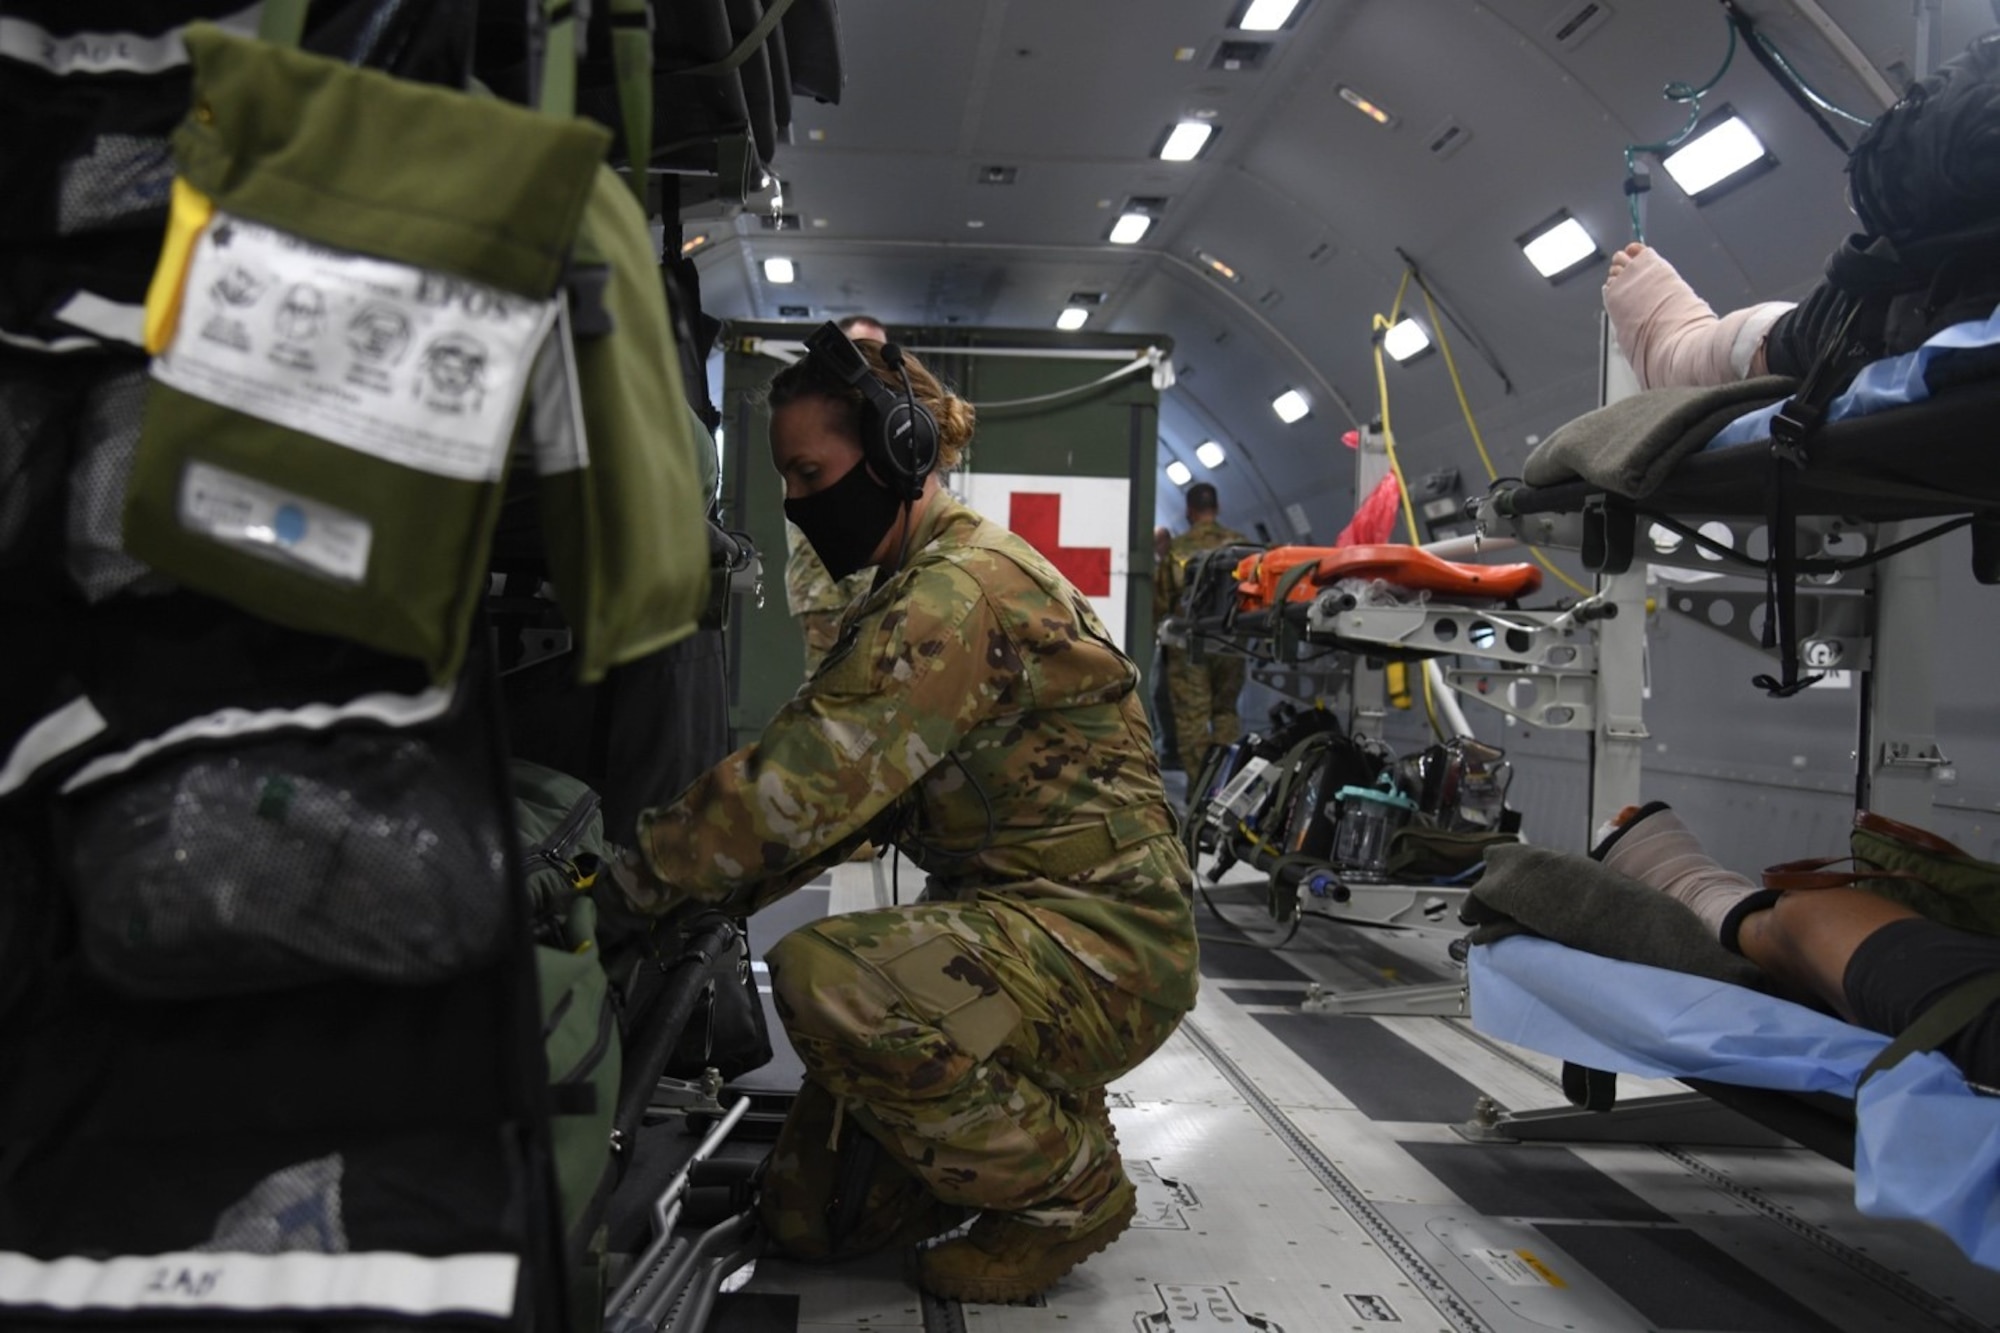 Master Sgt. Jaclyn Klimaski, Air Mobility Command aeromedical evacuation technician assigned to Air Mobility Command Headquarters at Scott Air Force Base, Illinois searches for equipment in an inflight kit July 10, 2020, at Joint Base Andrews, Maryland. In support of this Initial Operational Test and Evaluation, the Total Force AE crew qualified on the KC-46A Pegasus using a syllabus that included numerous patient scenarios and configurations to guide the execution of the training. (U.S. Air Force photo by Airman 1st Class Nilsa Garcia)